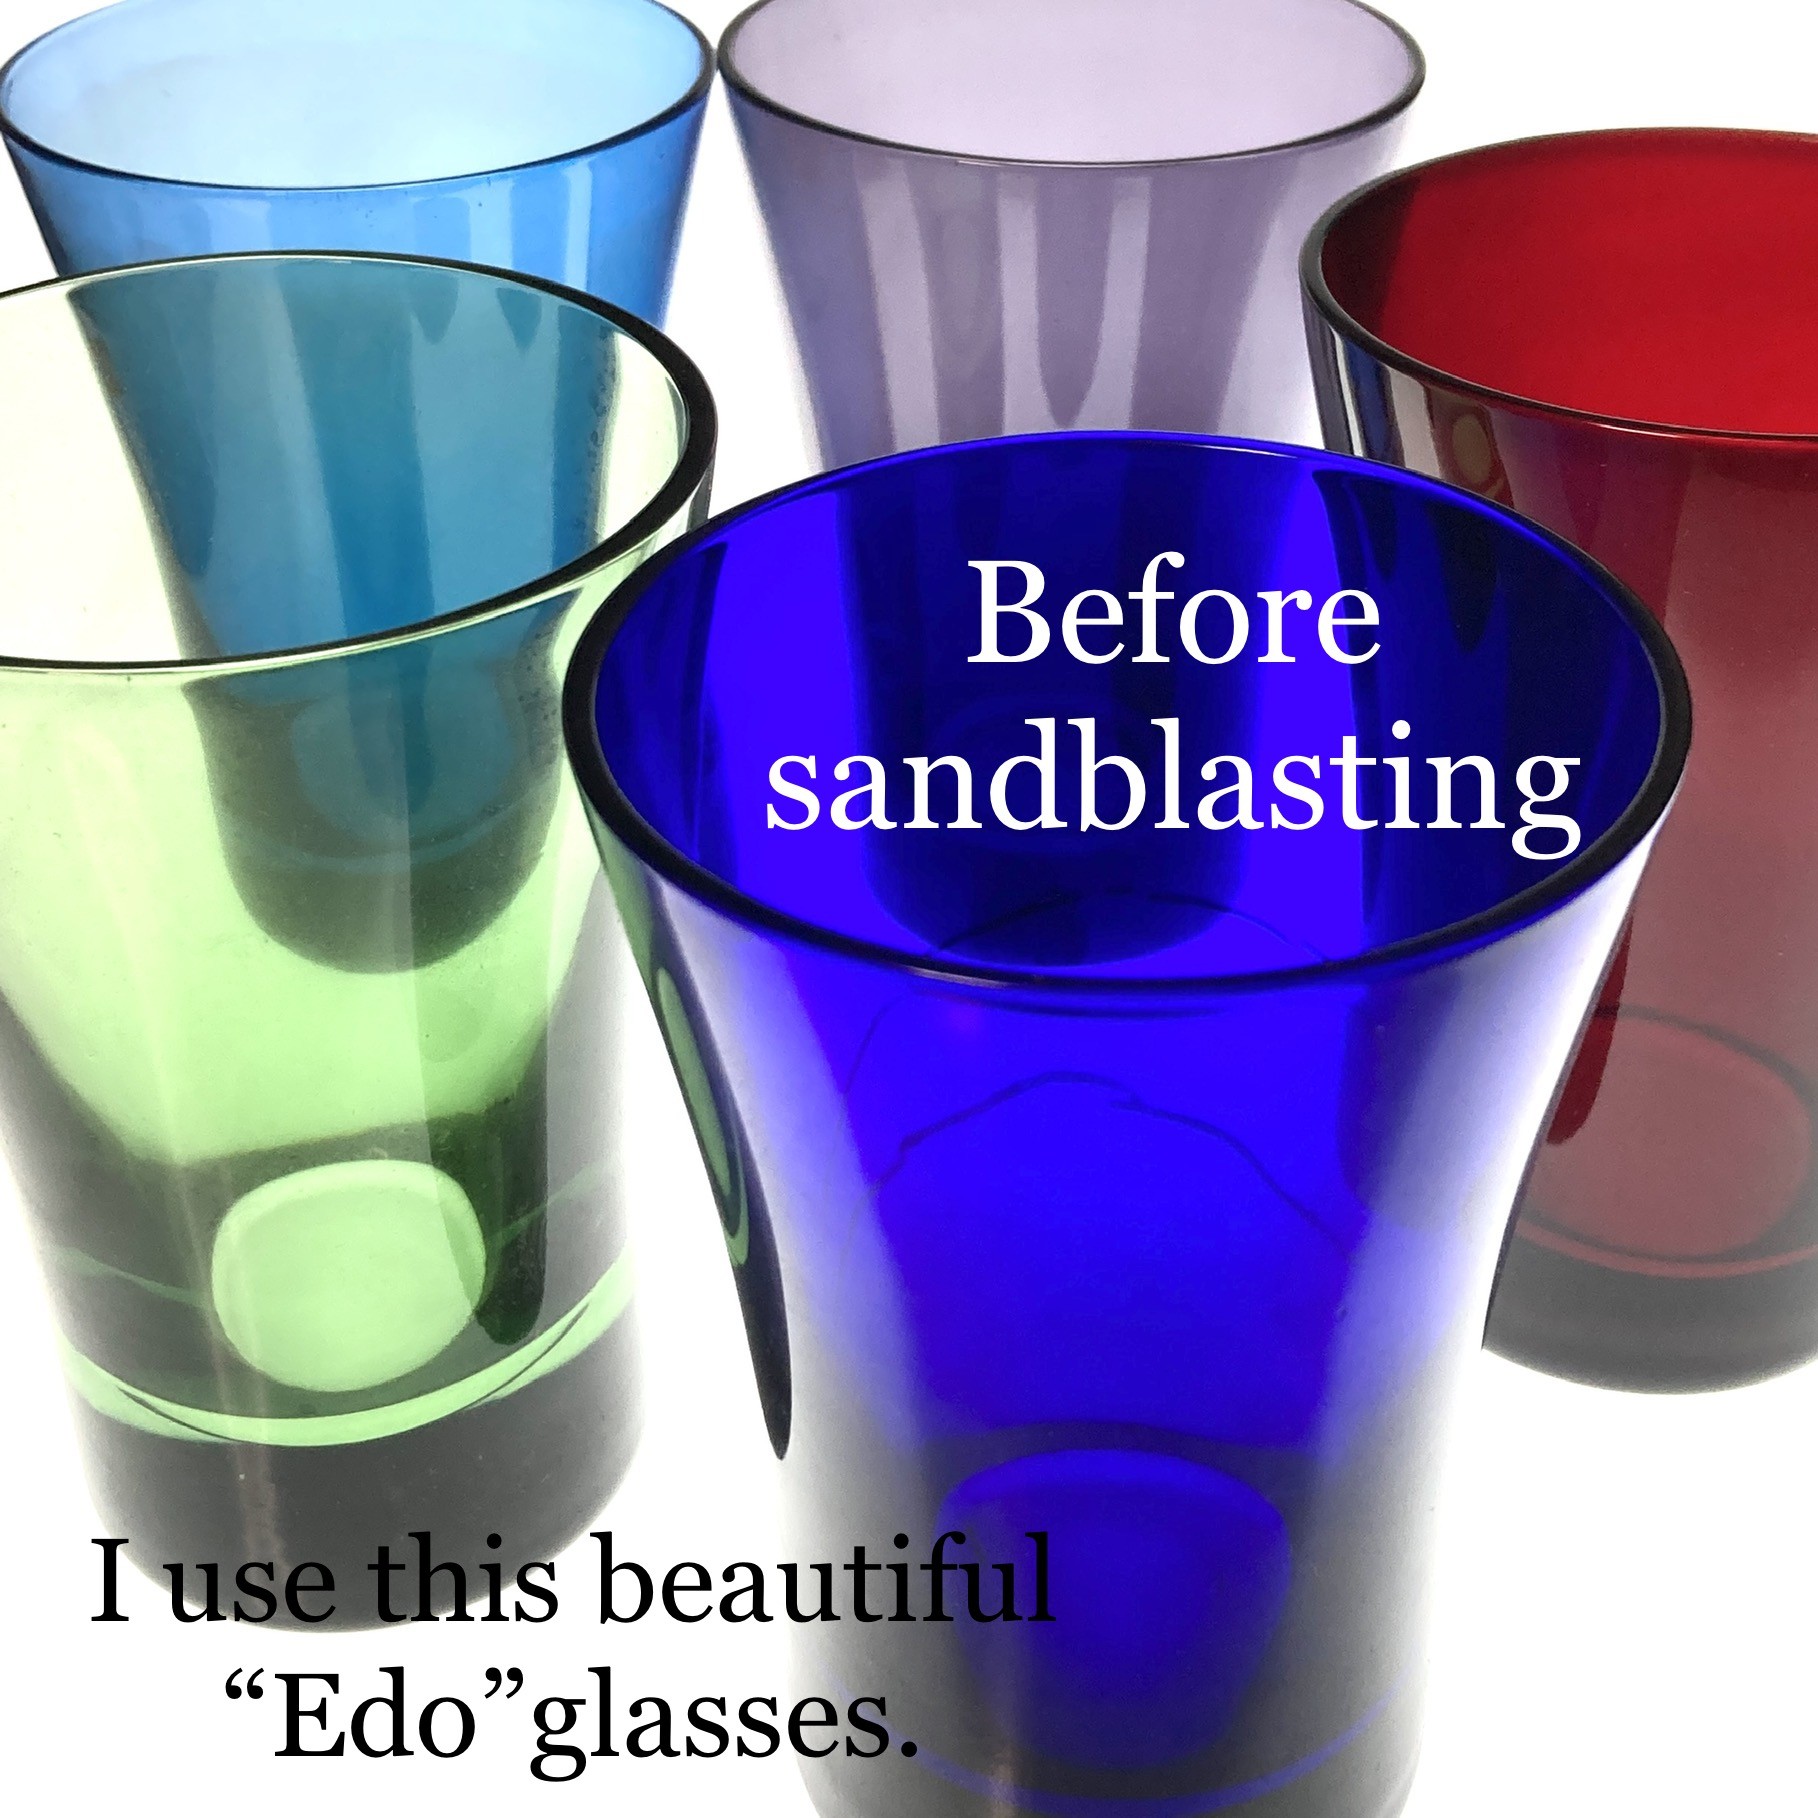 Edo Glass: Of Tradition and Prestige – Entirely Made by Hand